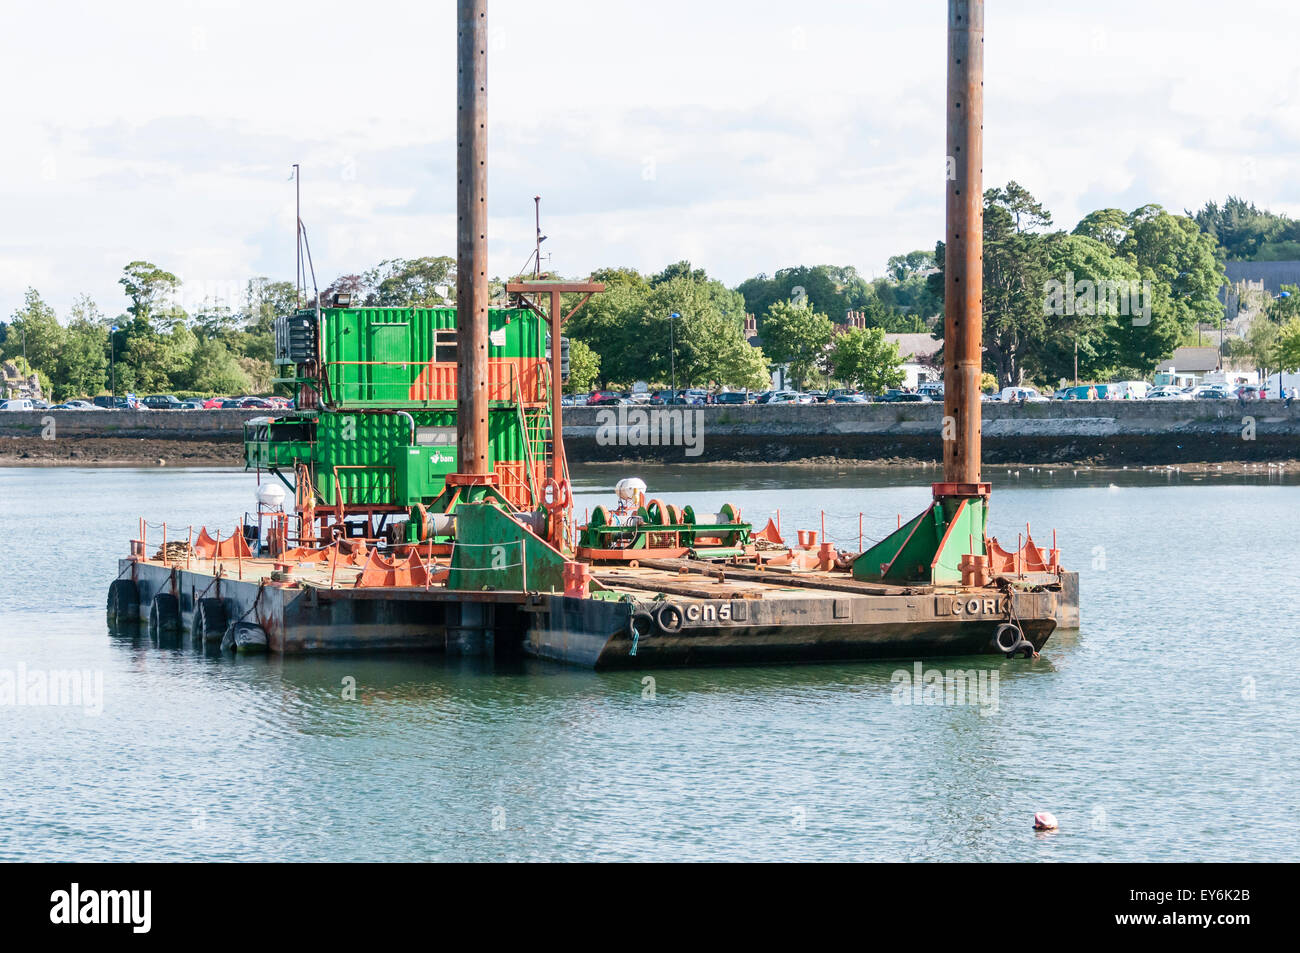 A floating jackup rig barge for construction works at a harbour.  The barge is towed into position, then the legs lowered to lift it out of the water. Stock Photo